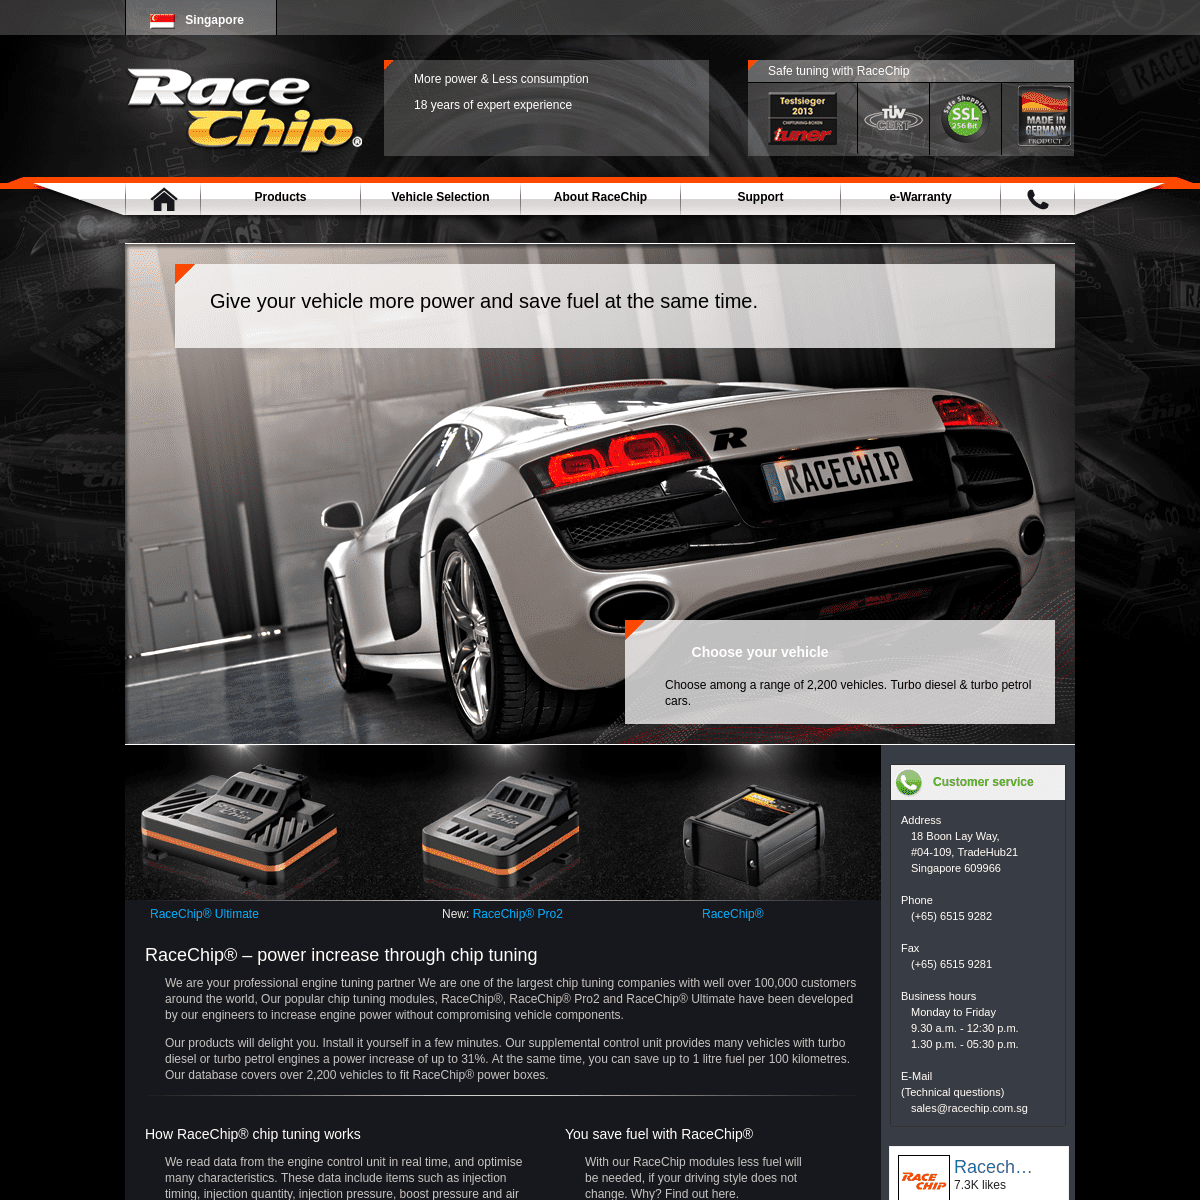 A complete backup of racechip.com.sg